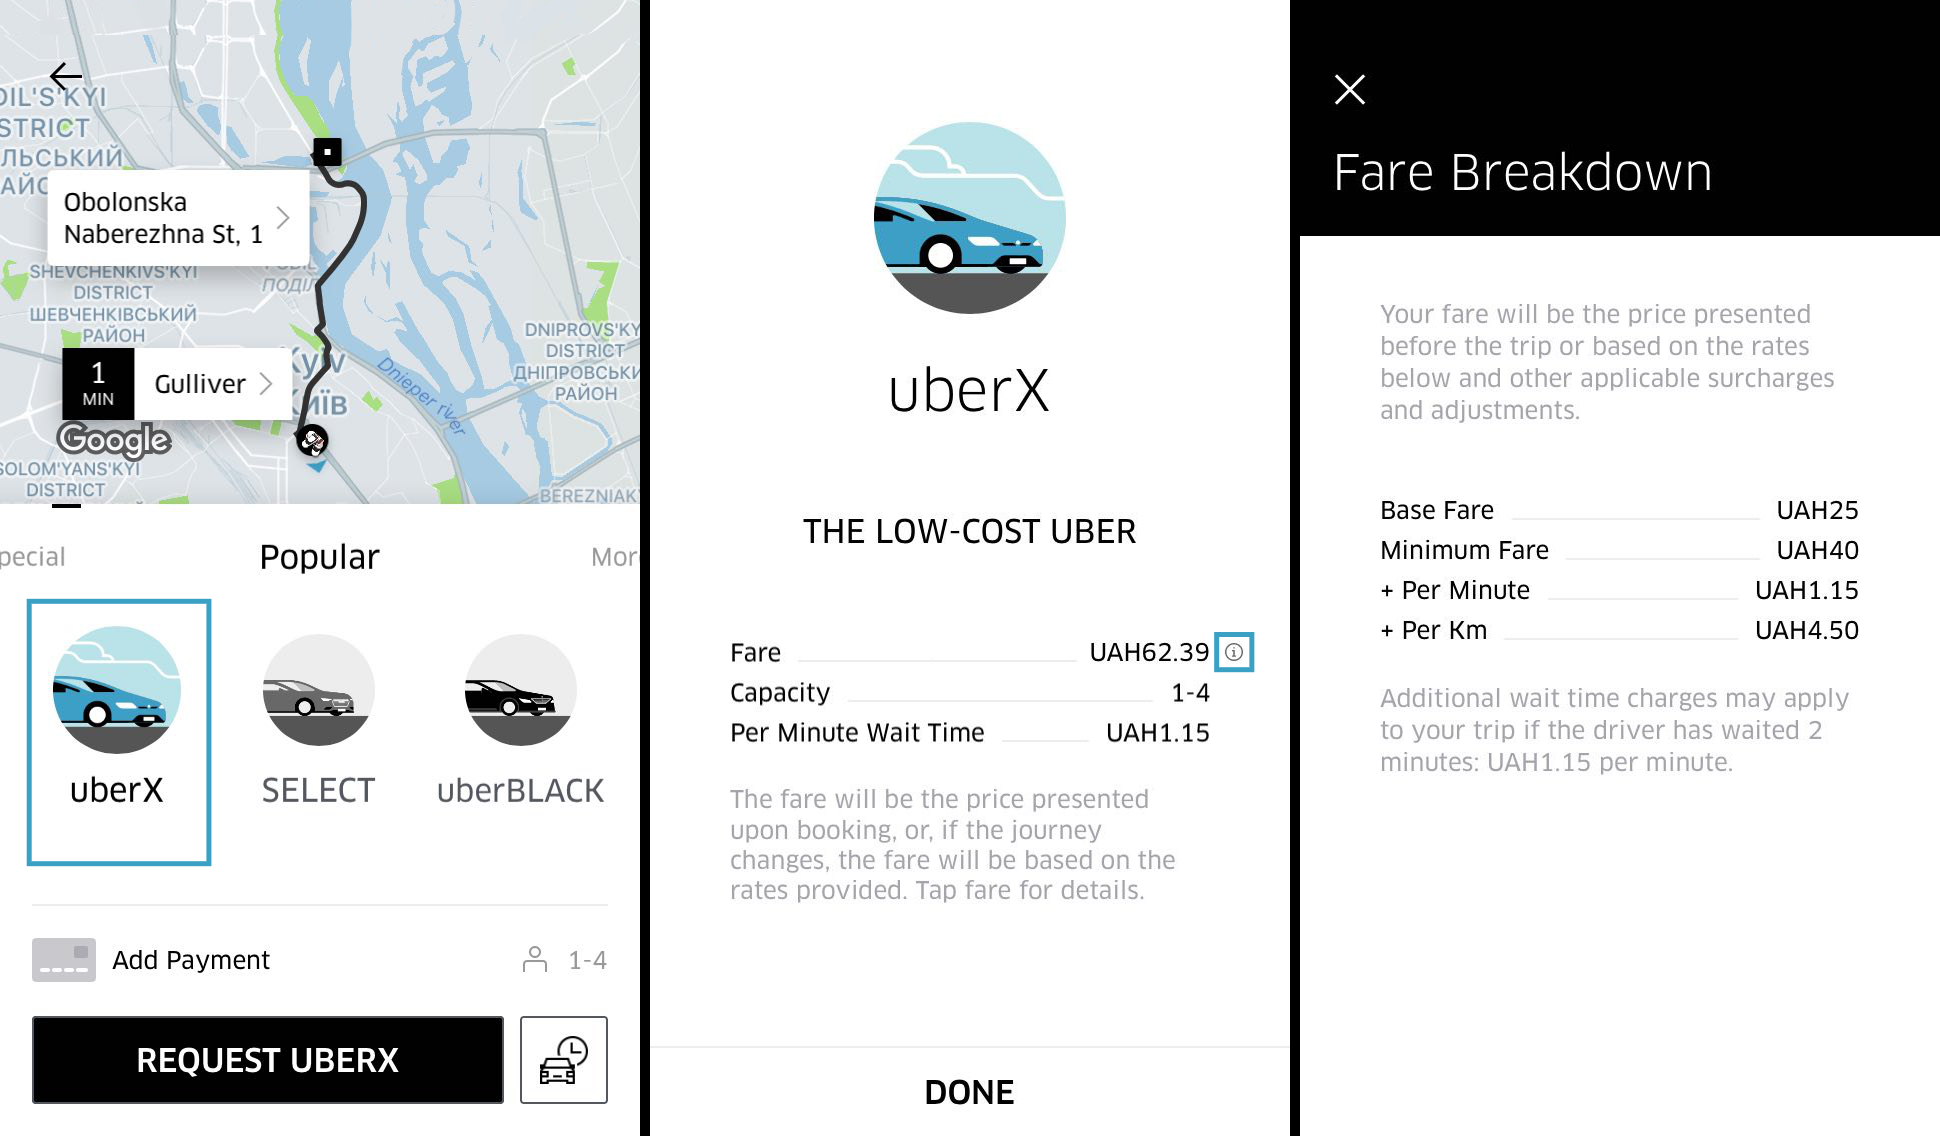 Trip fare: Know Before You Go | Uber Blog